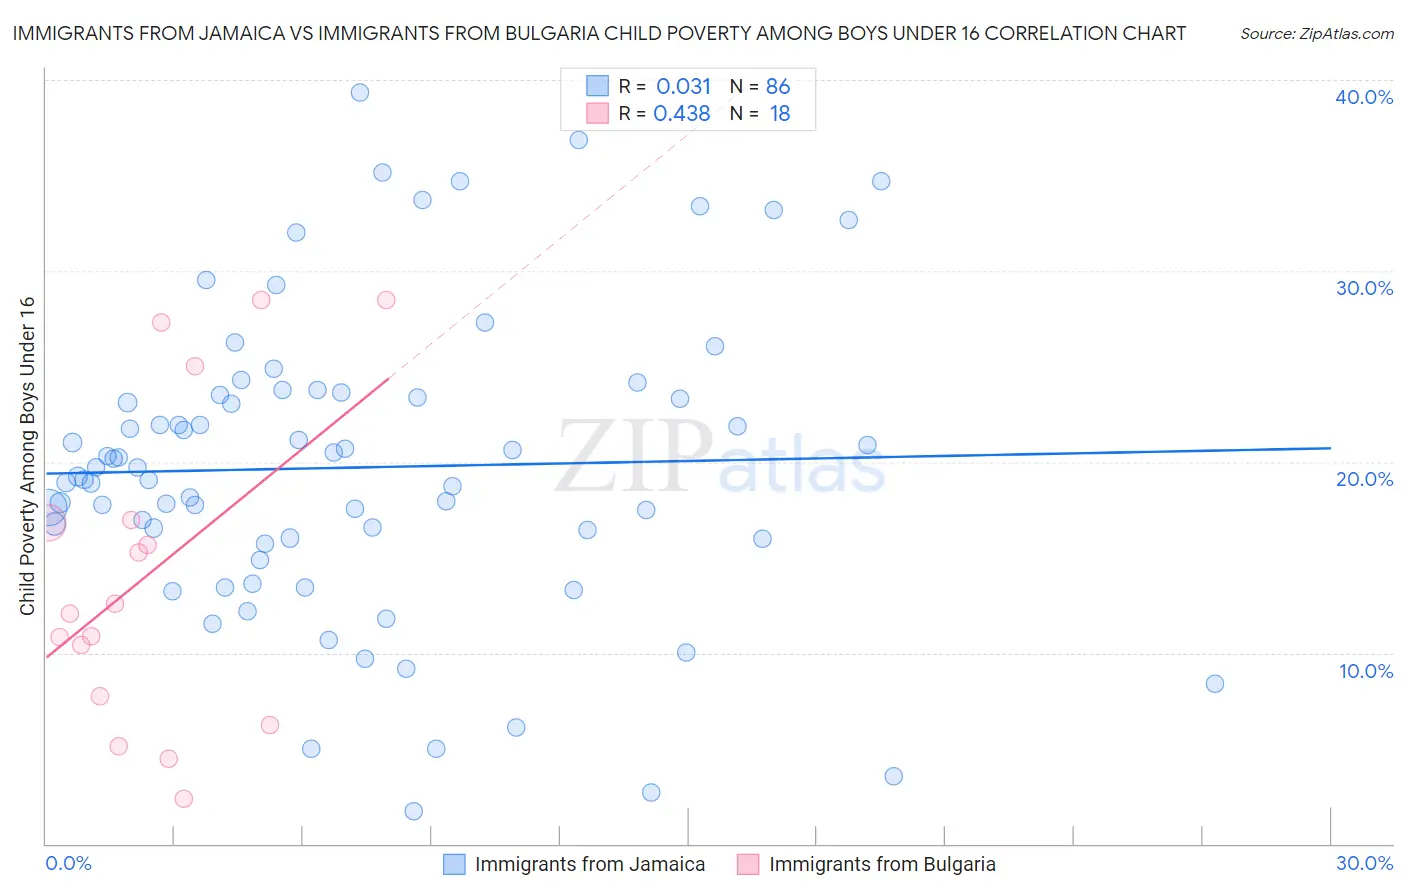 Immigrants from Jamaica vs Immigrants from Bulgaria Child Poverty Among Boys Under 16